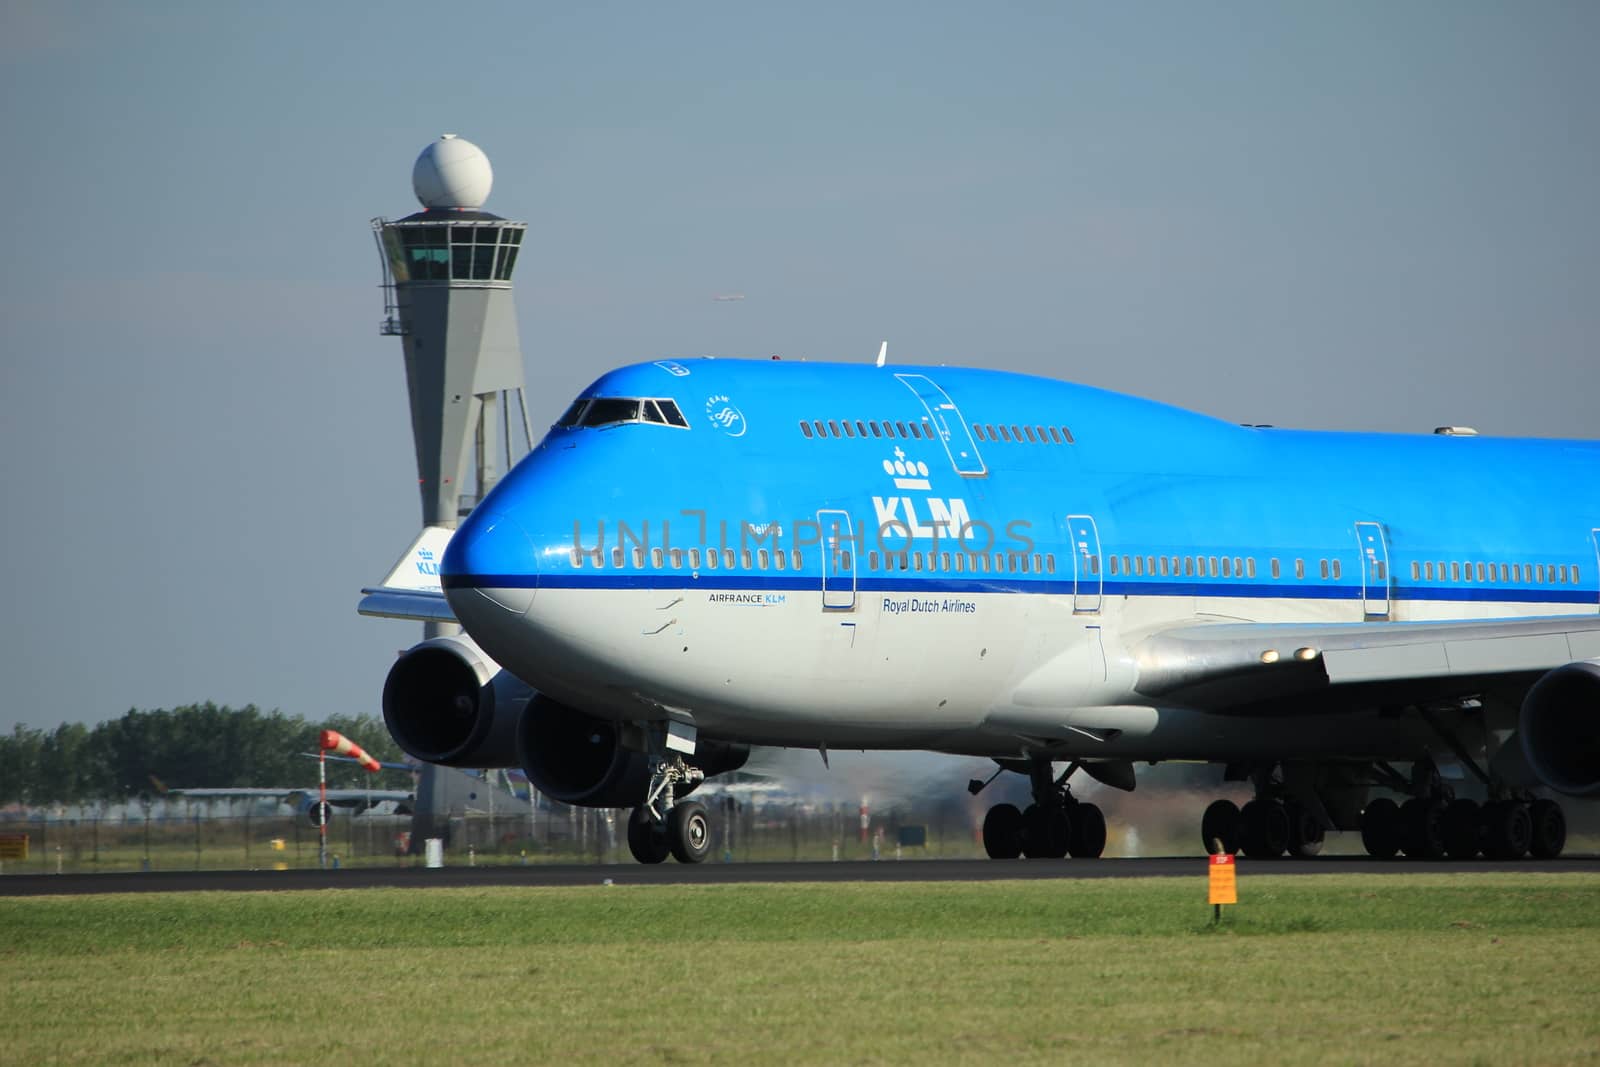 Amsterdam, the Netherlands  - August, 18th 2016: PH-BFU KLM Royal Dutch Airlines Boeing 747-406(M),
taking off from Polderbaan Runway Amsterdam Airport Schiphol